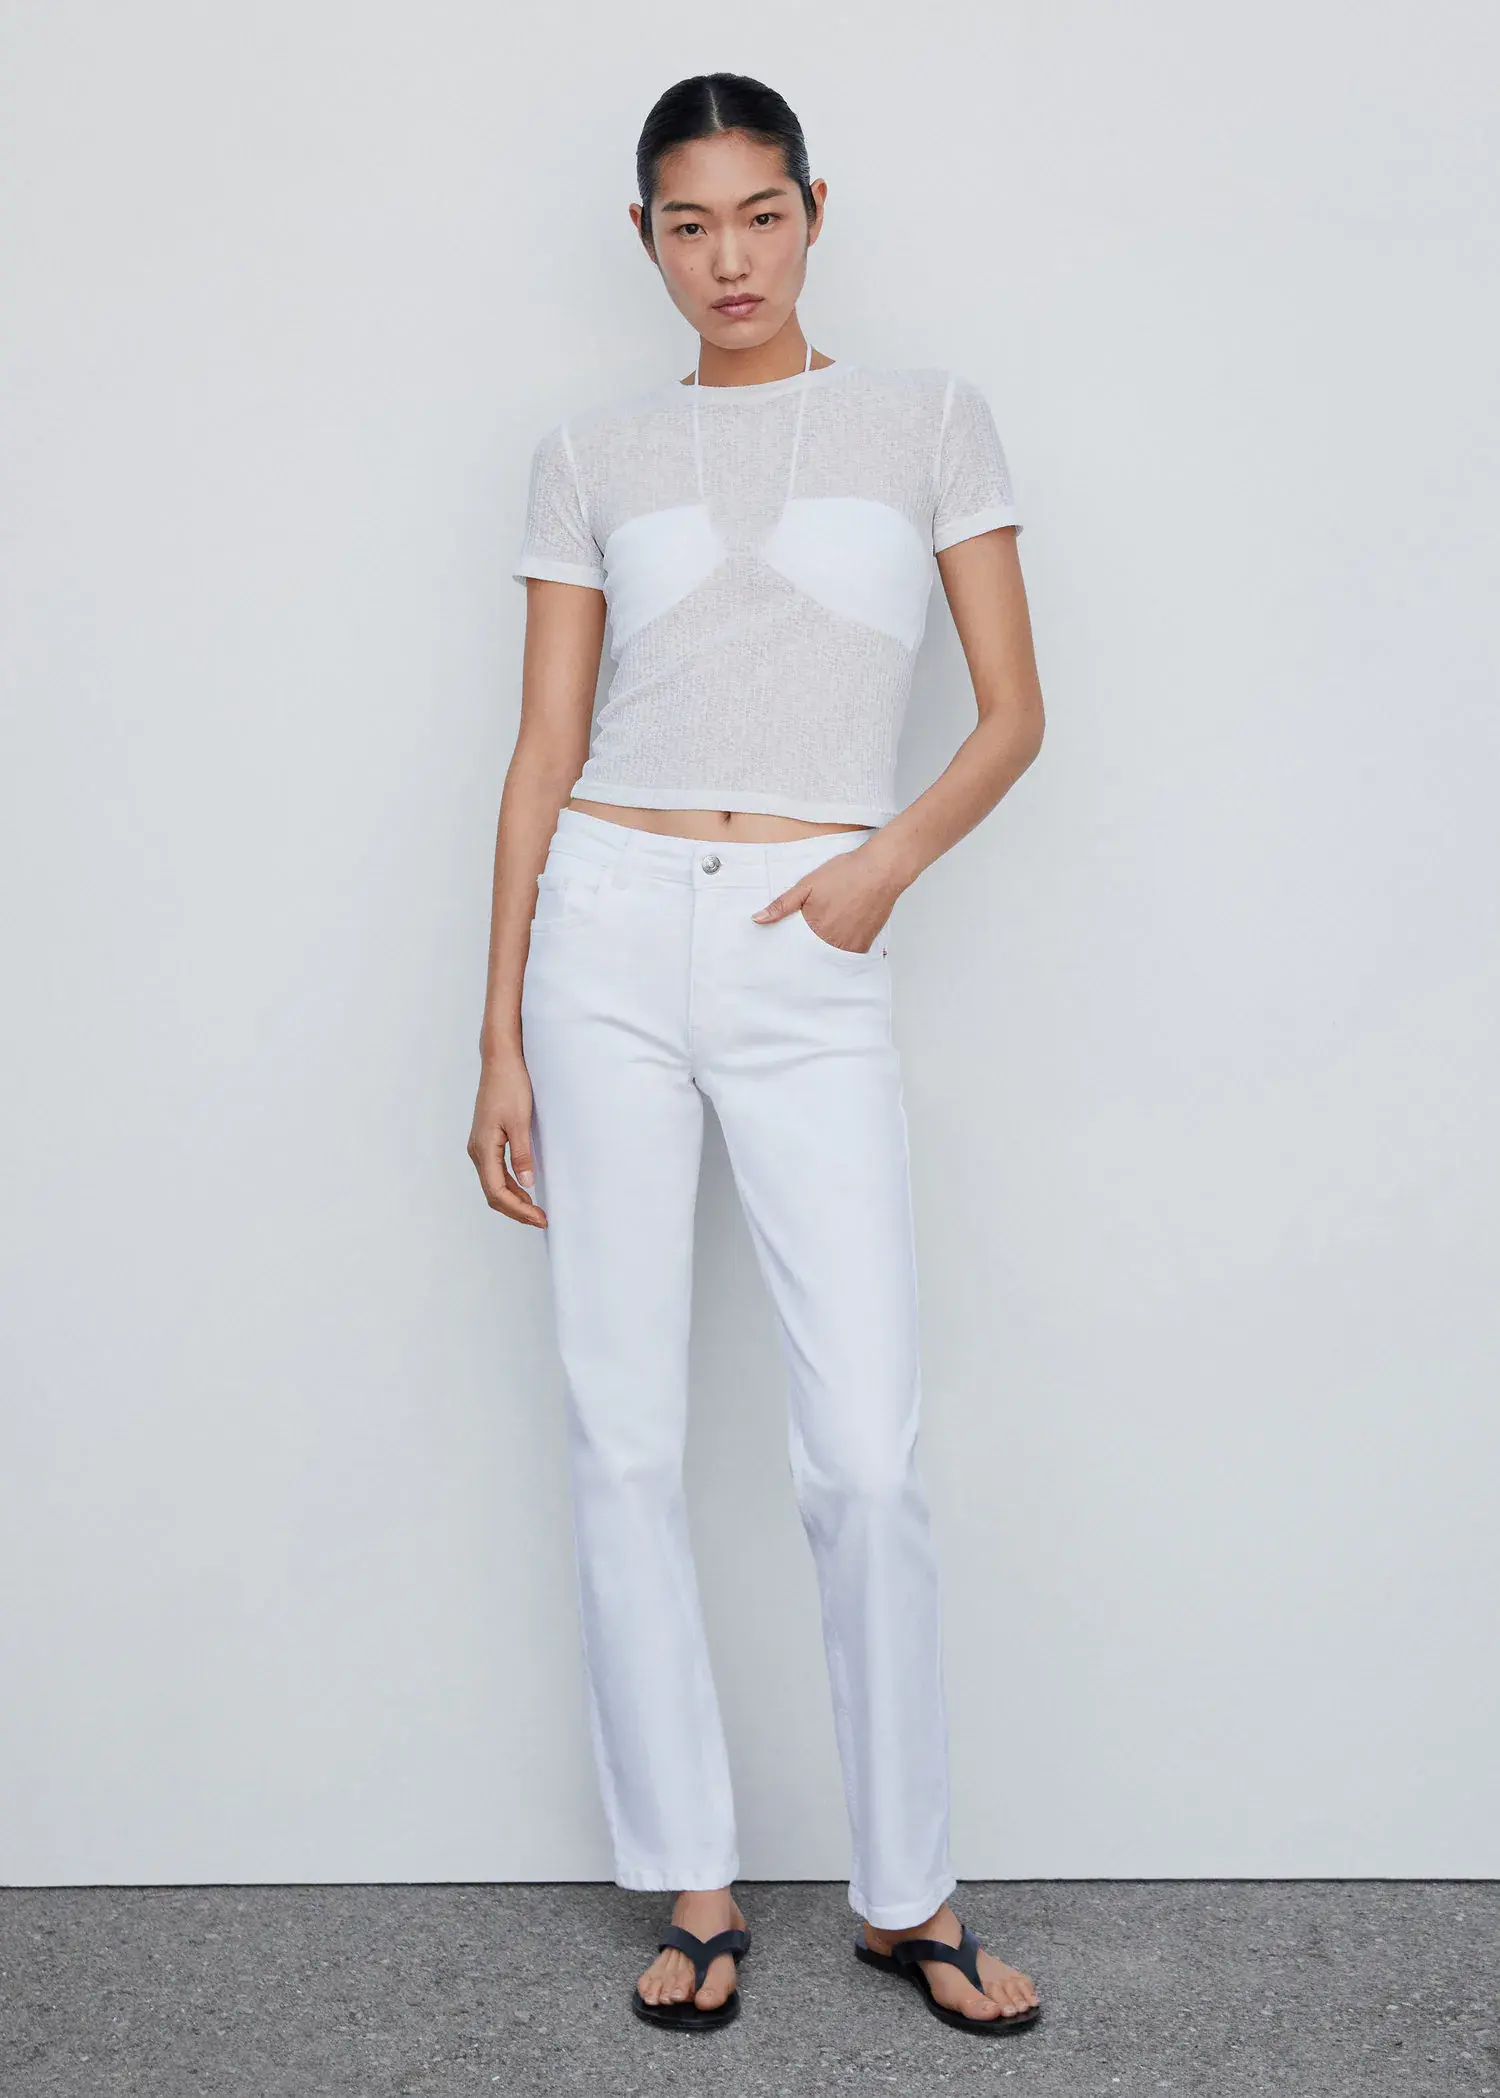 Mango Medium-comfort straight jeans. a woman wearing all white poses for a picture. 